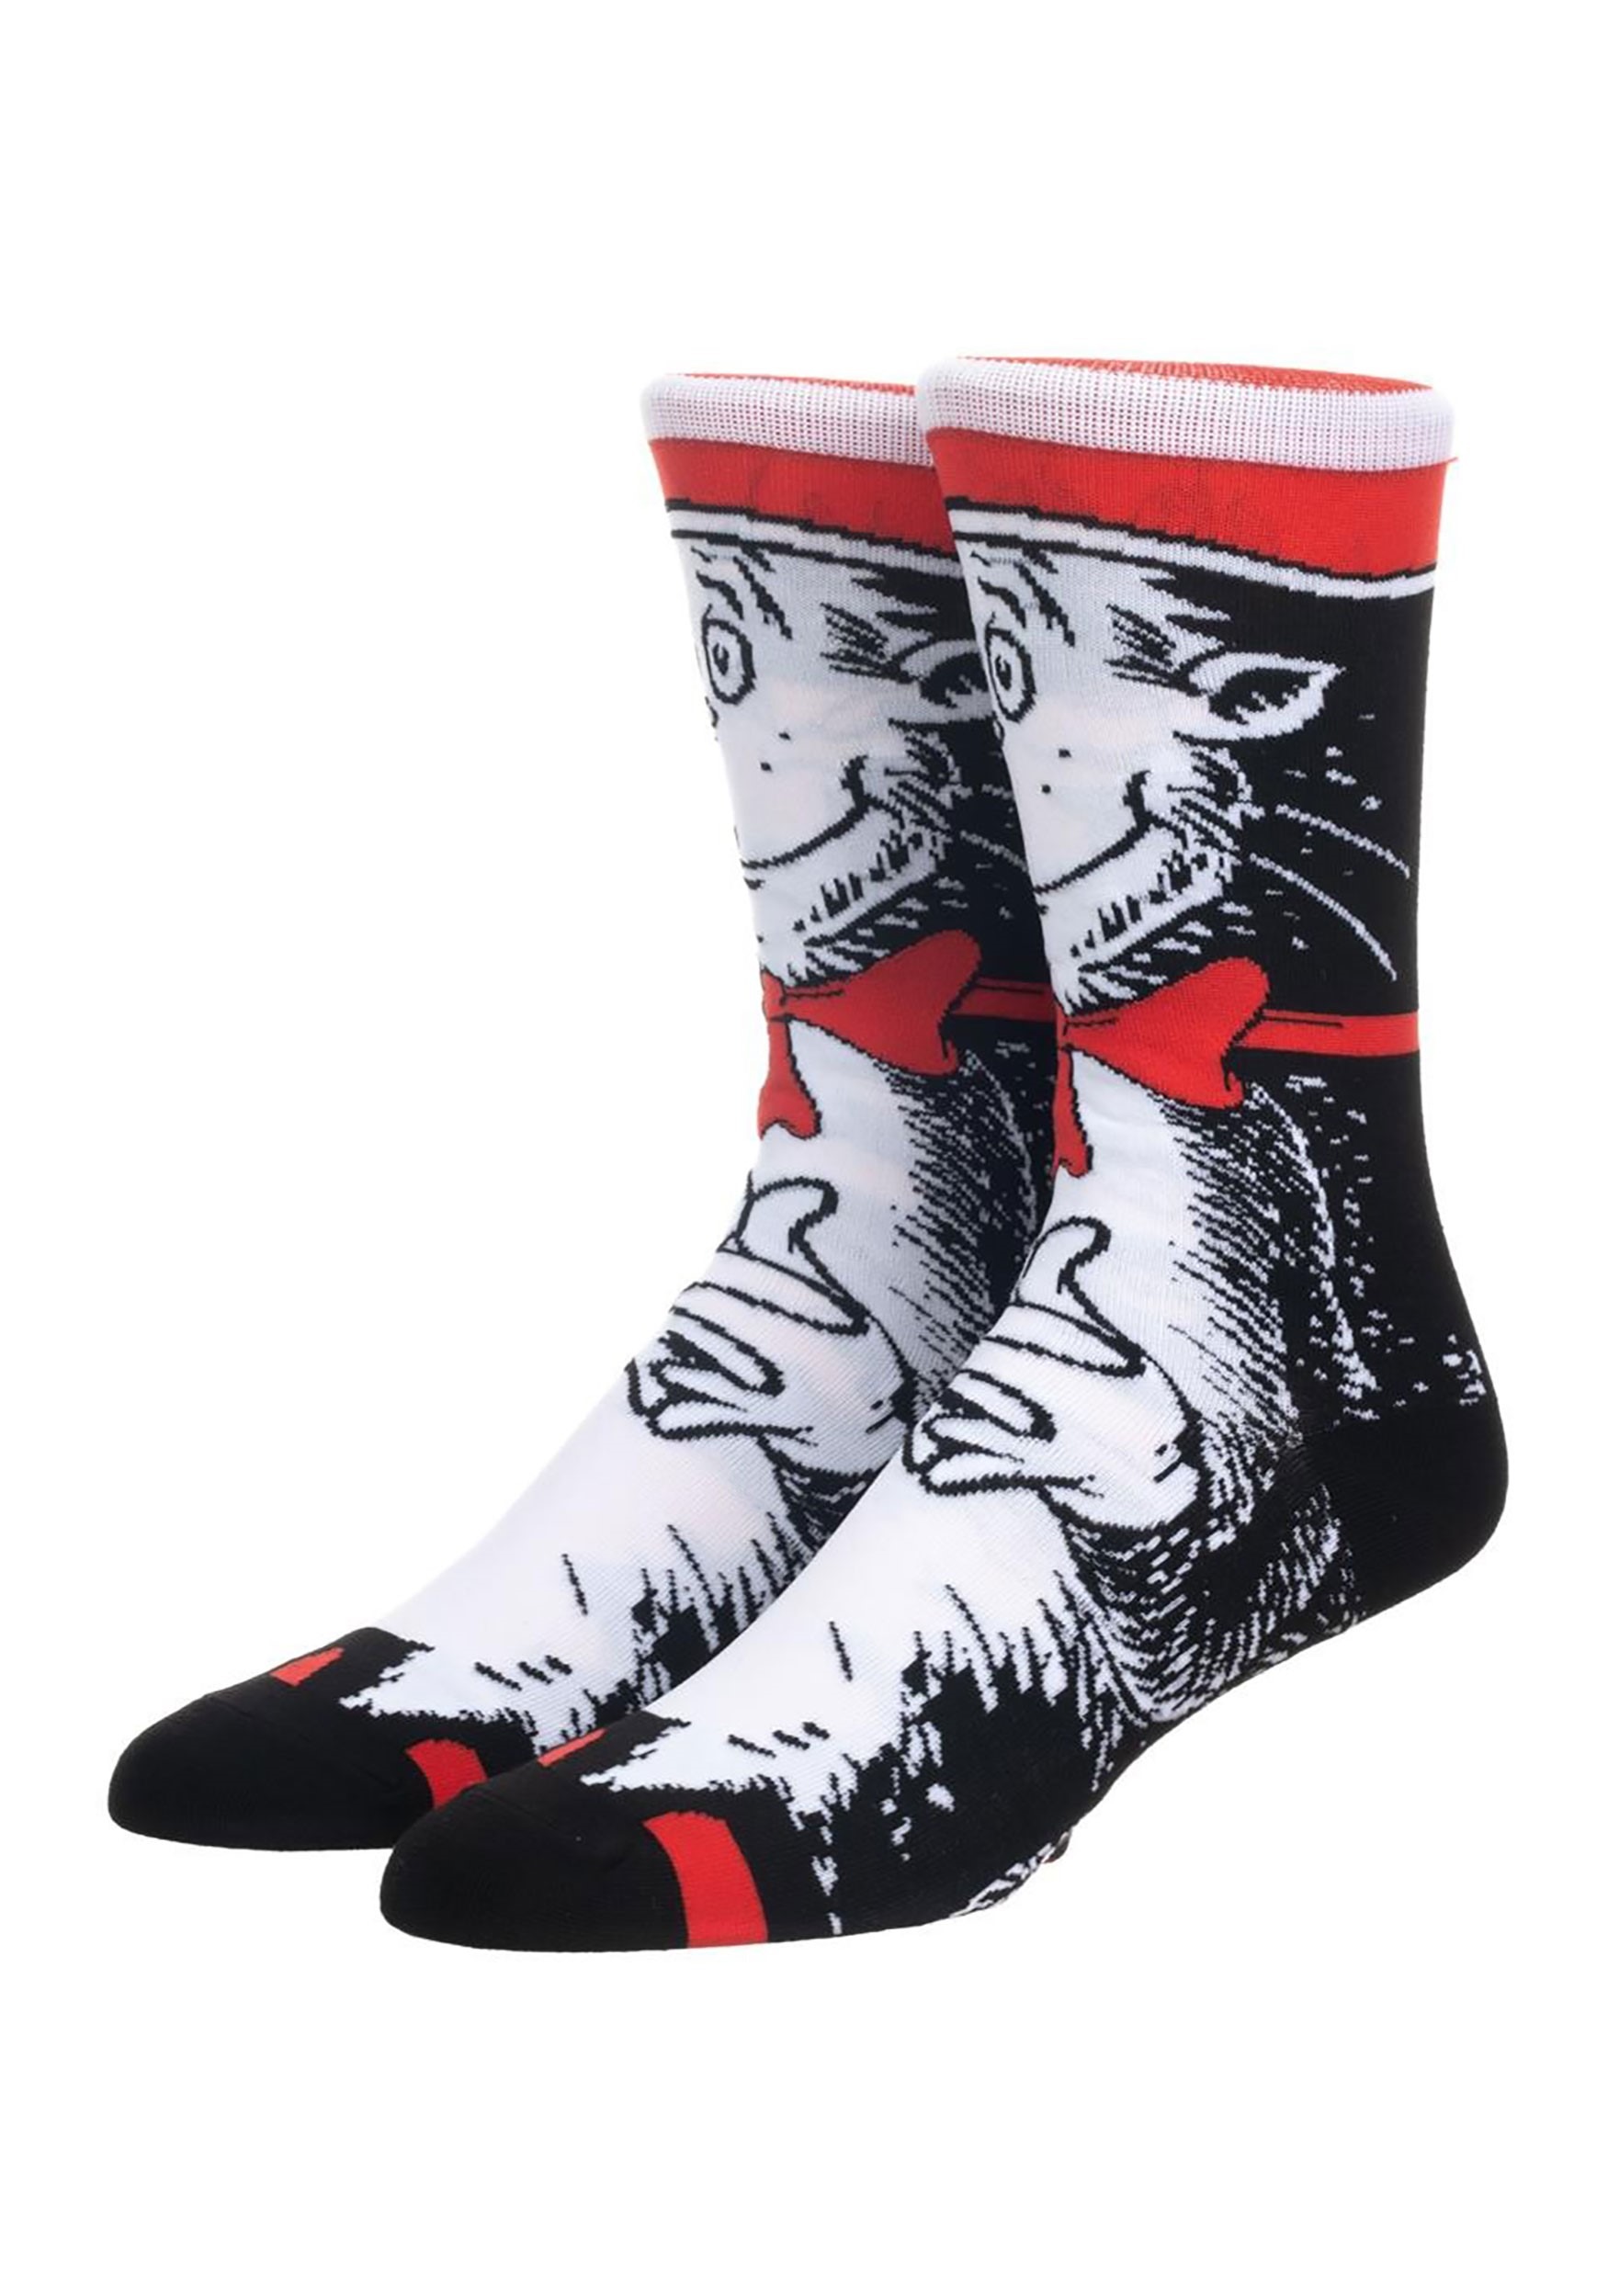 360 Character Crew Socks Dr. Seuss Cat in the Hat